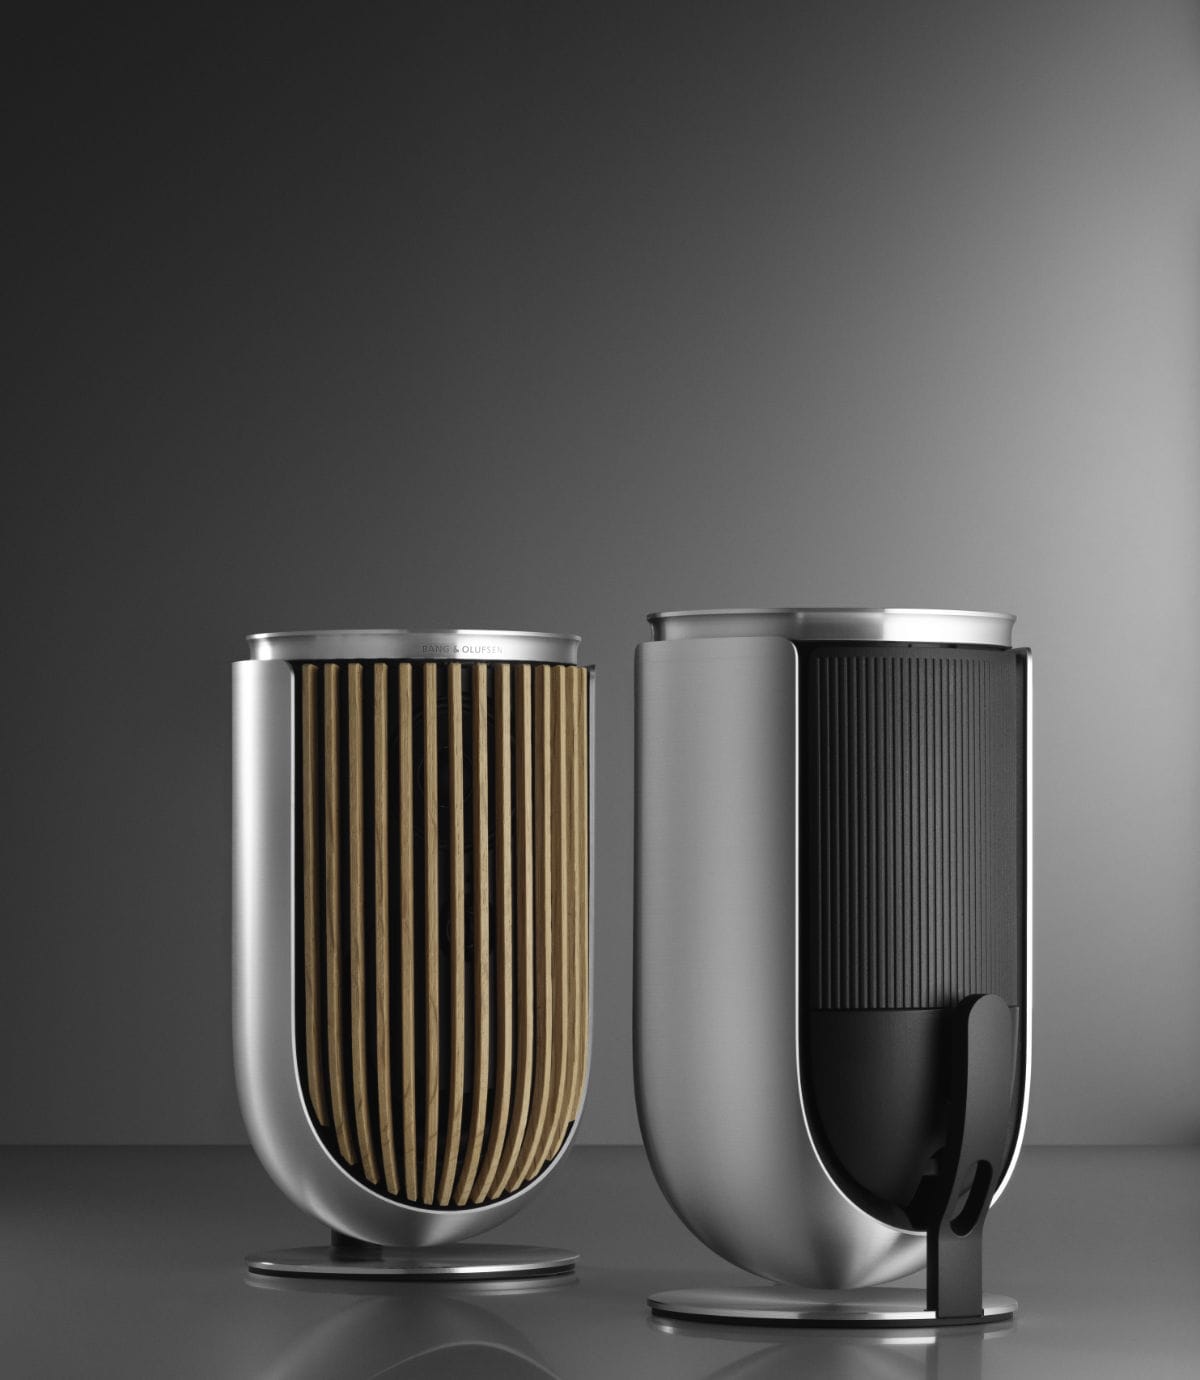 Bang & Olufsen announces its new Beolab 8 speakers